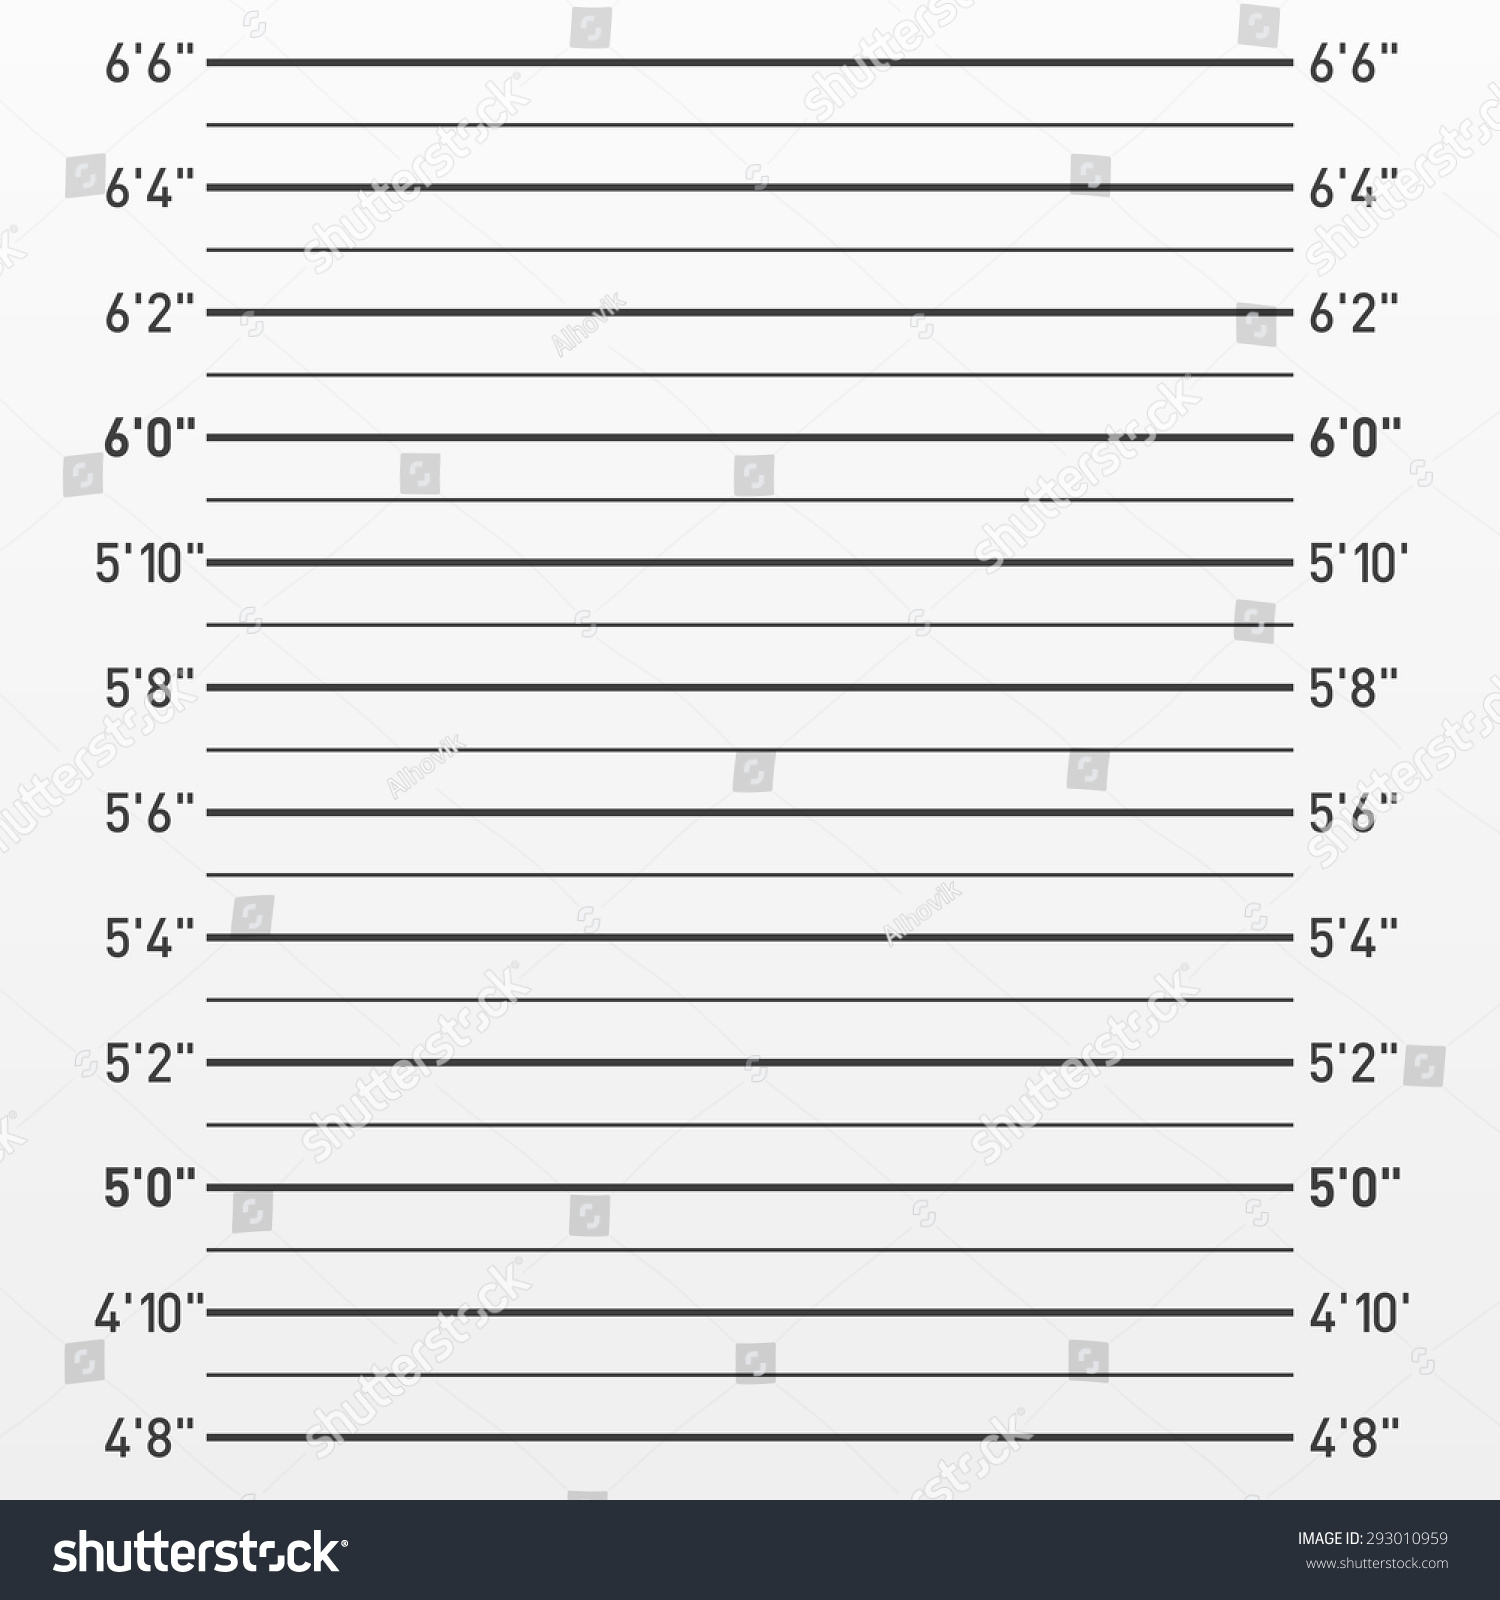 Police Lineup Mugshot Background Vector Stock Vector (Royalty Free ...